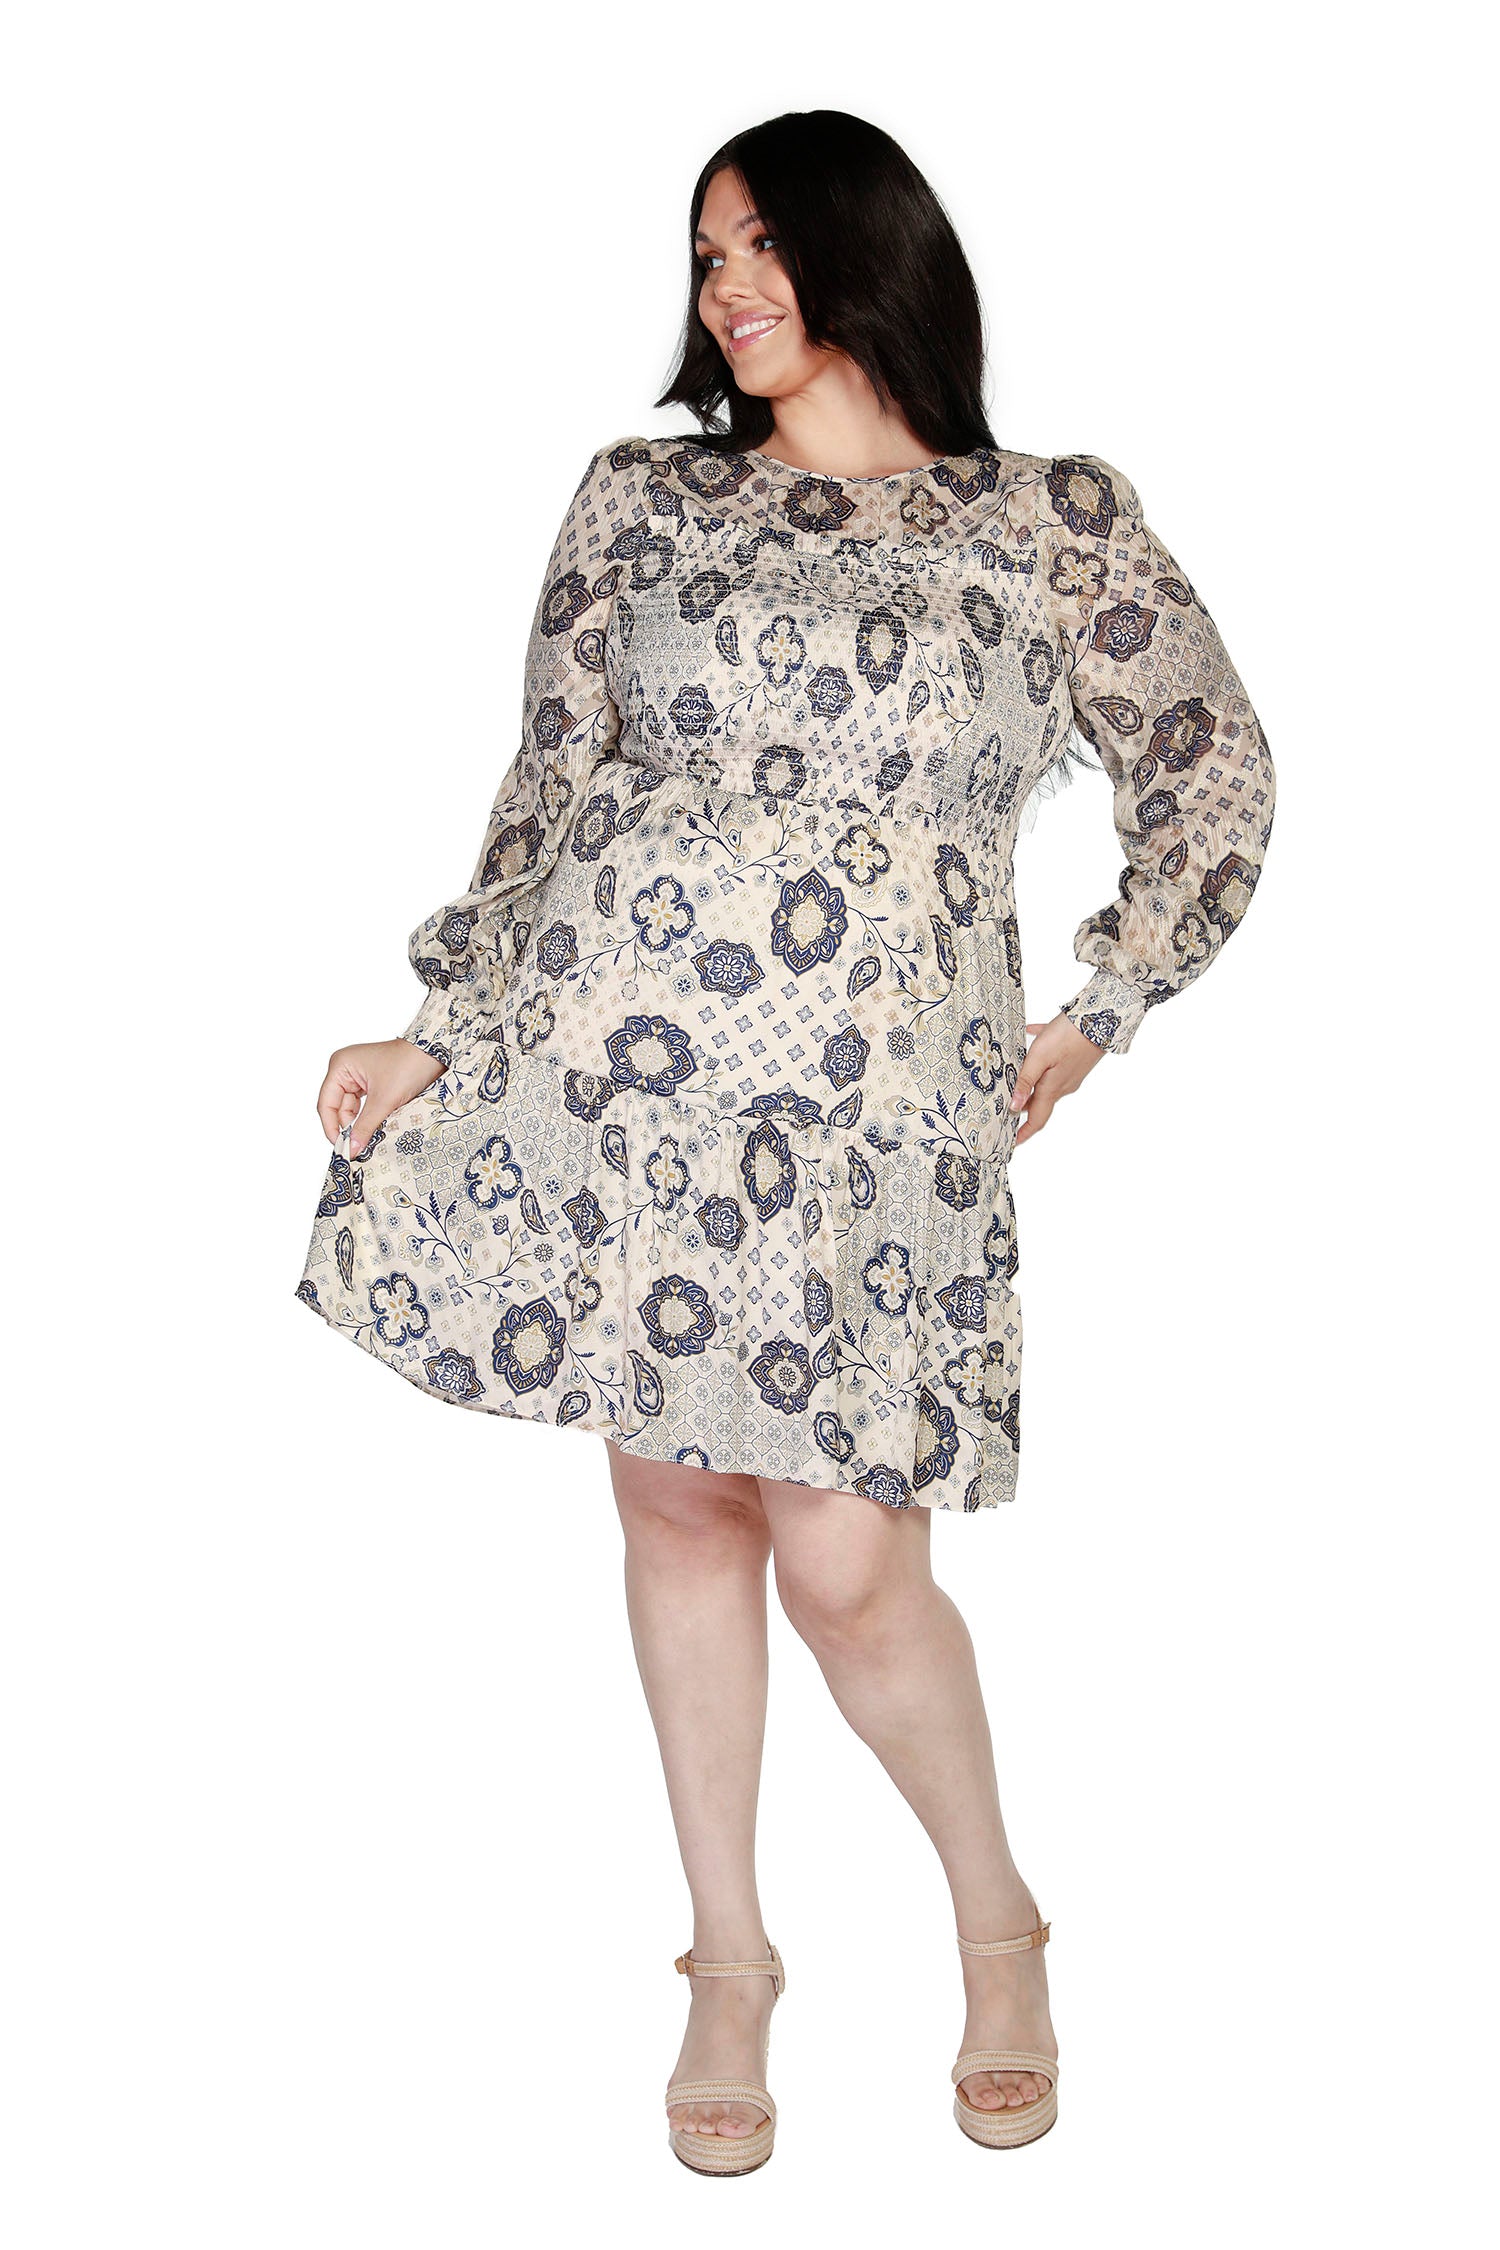 Women's Floral Paisley Dress with Chiffon and a Touch of Shimmer | Curvy LAST CALL